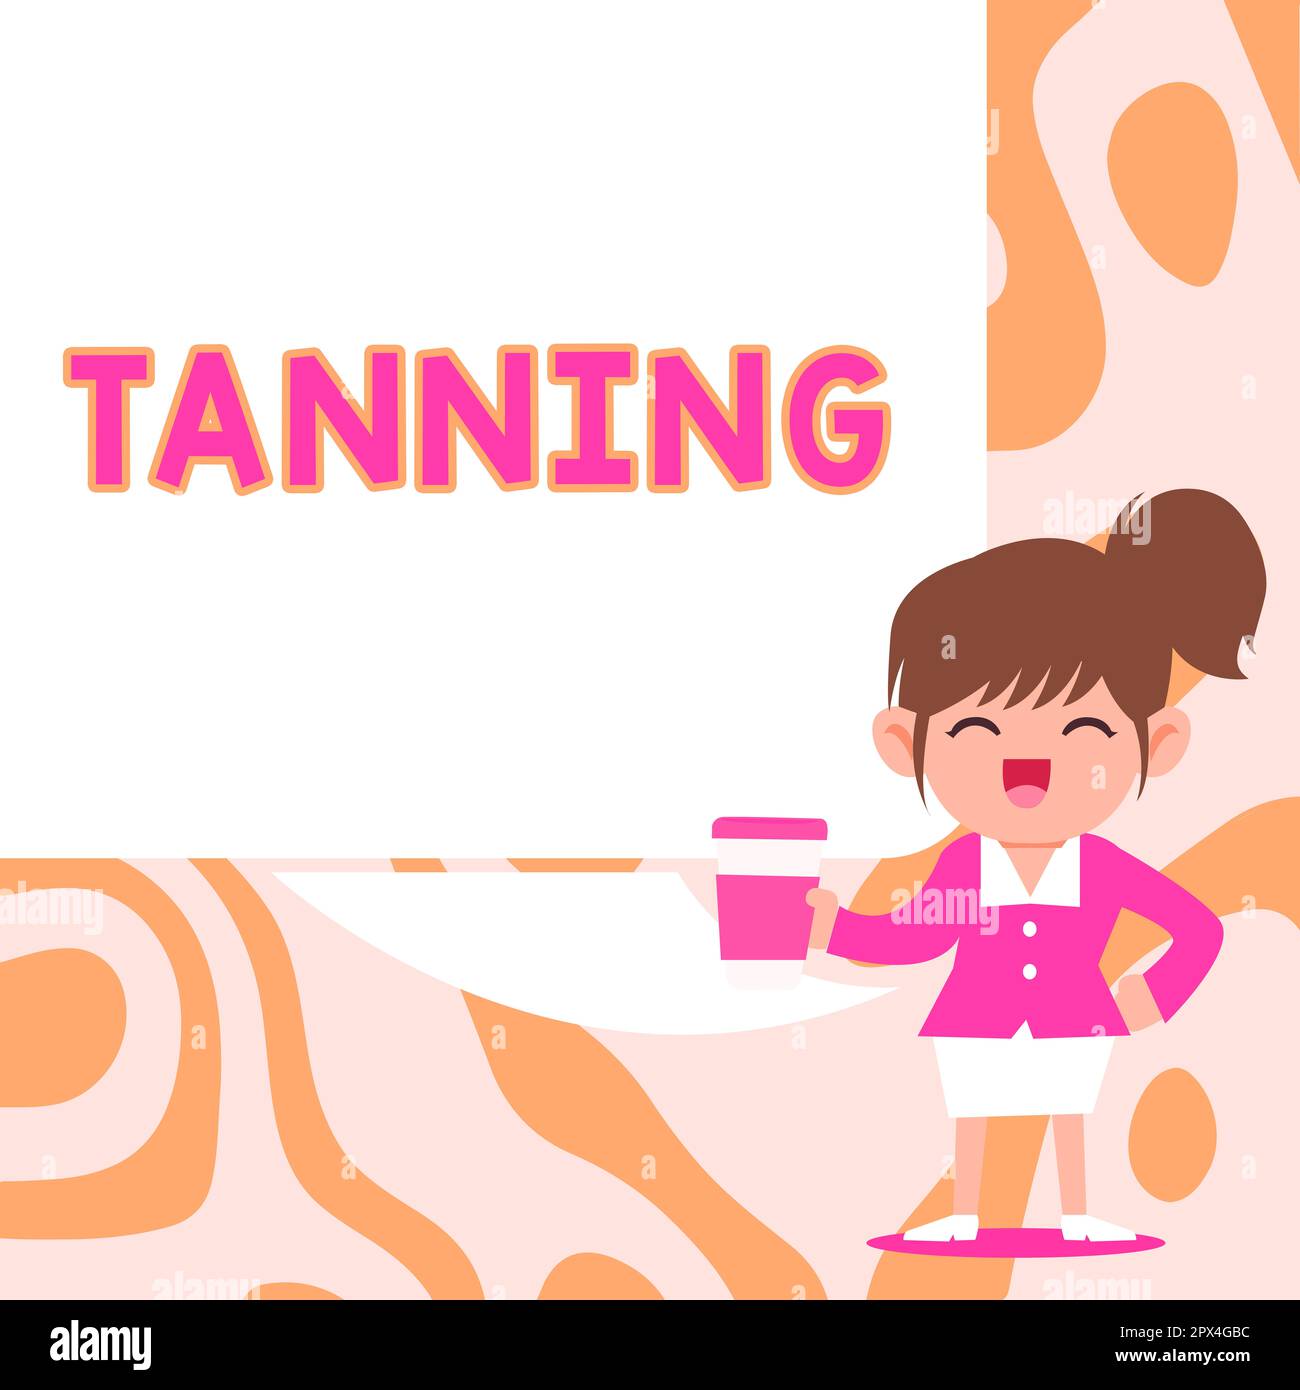 Text showing inspiration Tanning, Internet Concept a natural darkening of the scin tissues after exposure to the sun Stock Photo